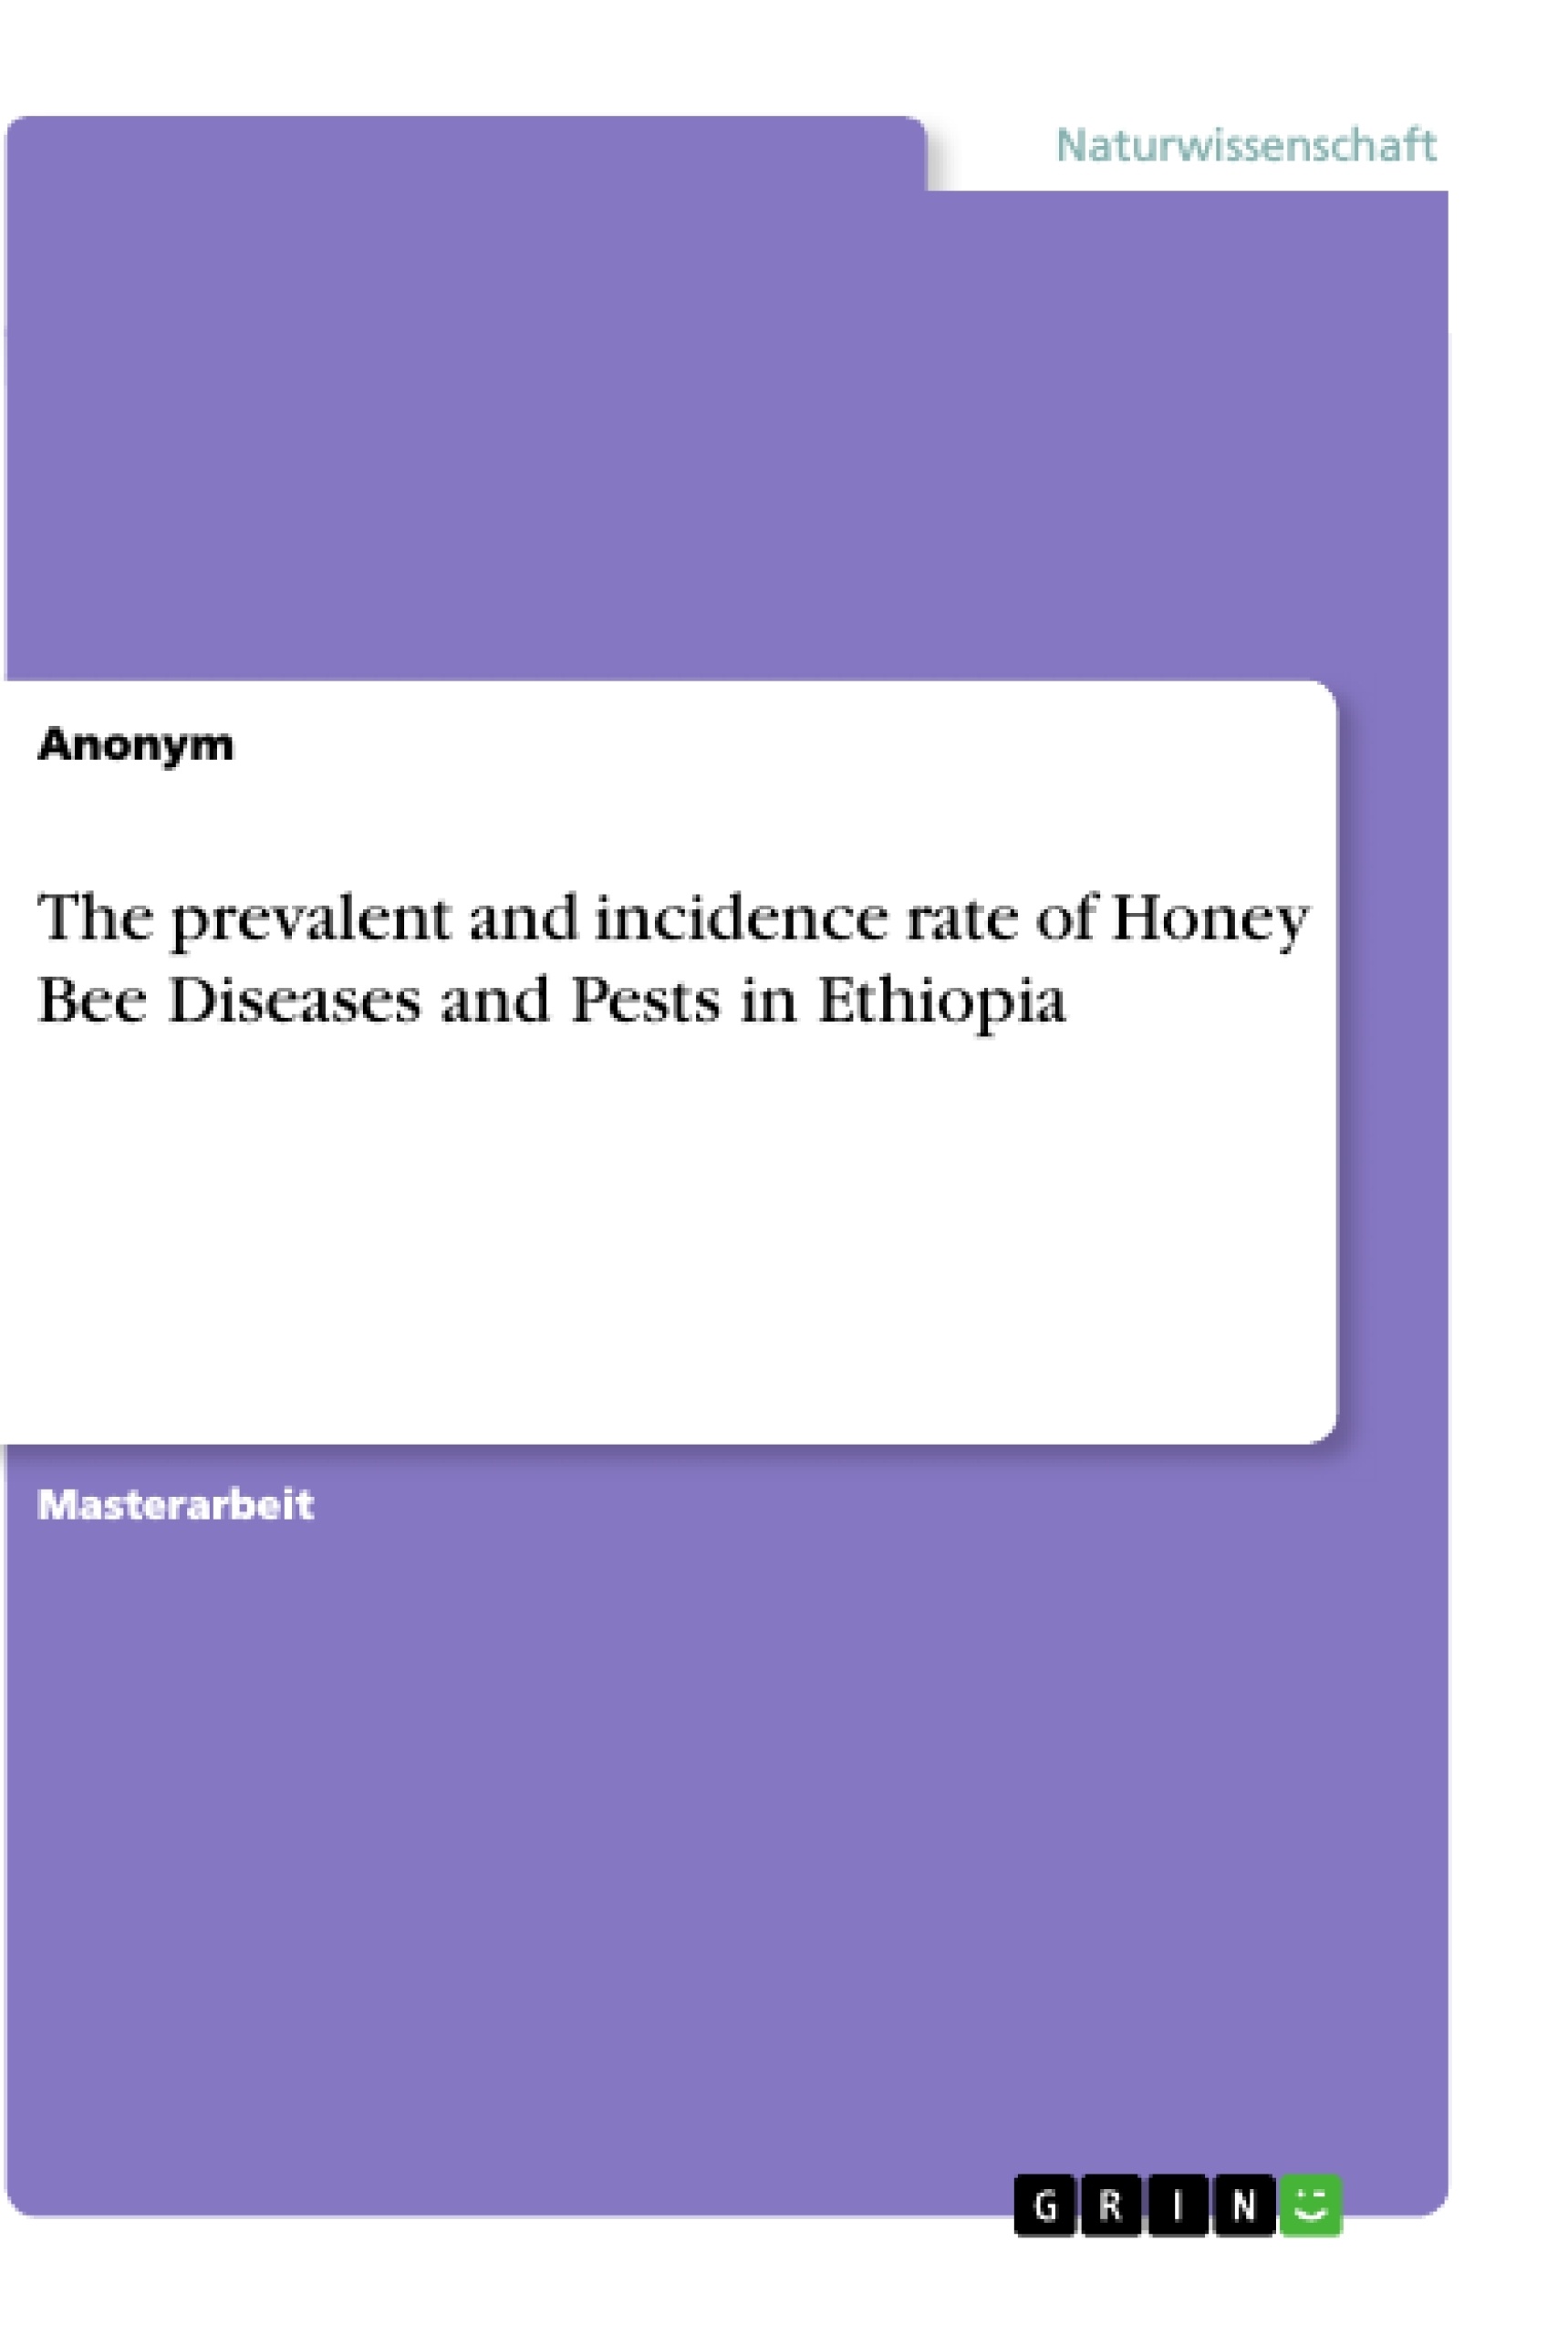 Titel: The prevalent and incidence rate of Honey Bee Diseases and Pests in Ethiopia